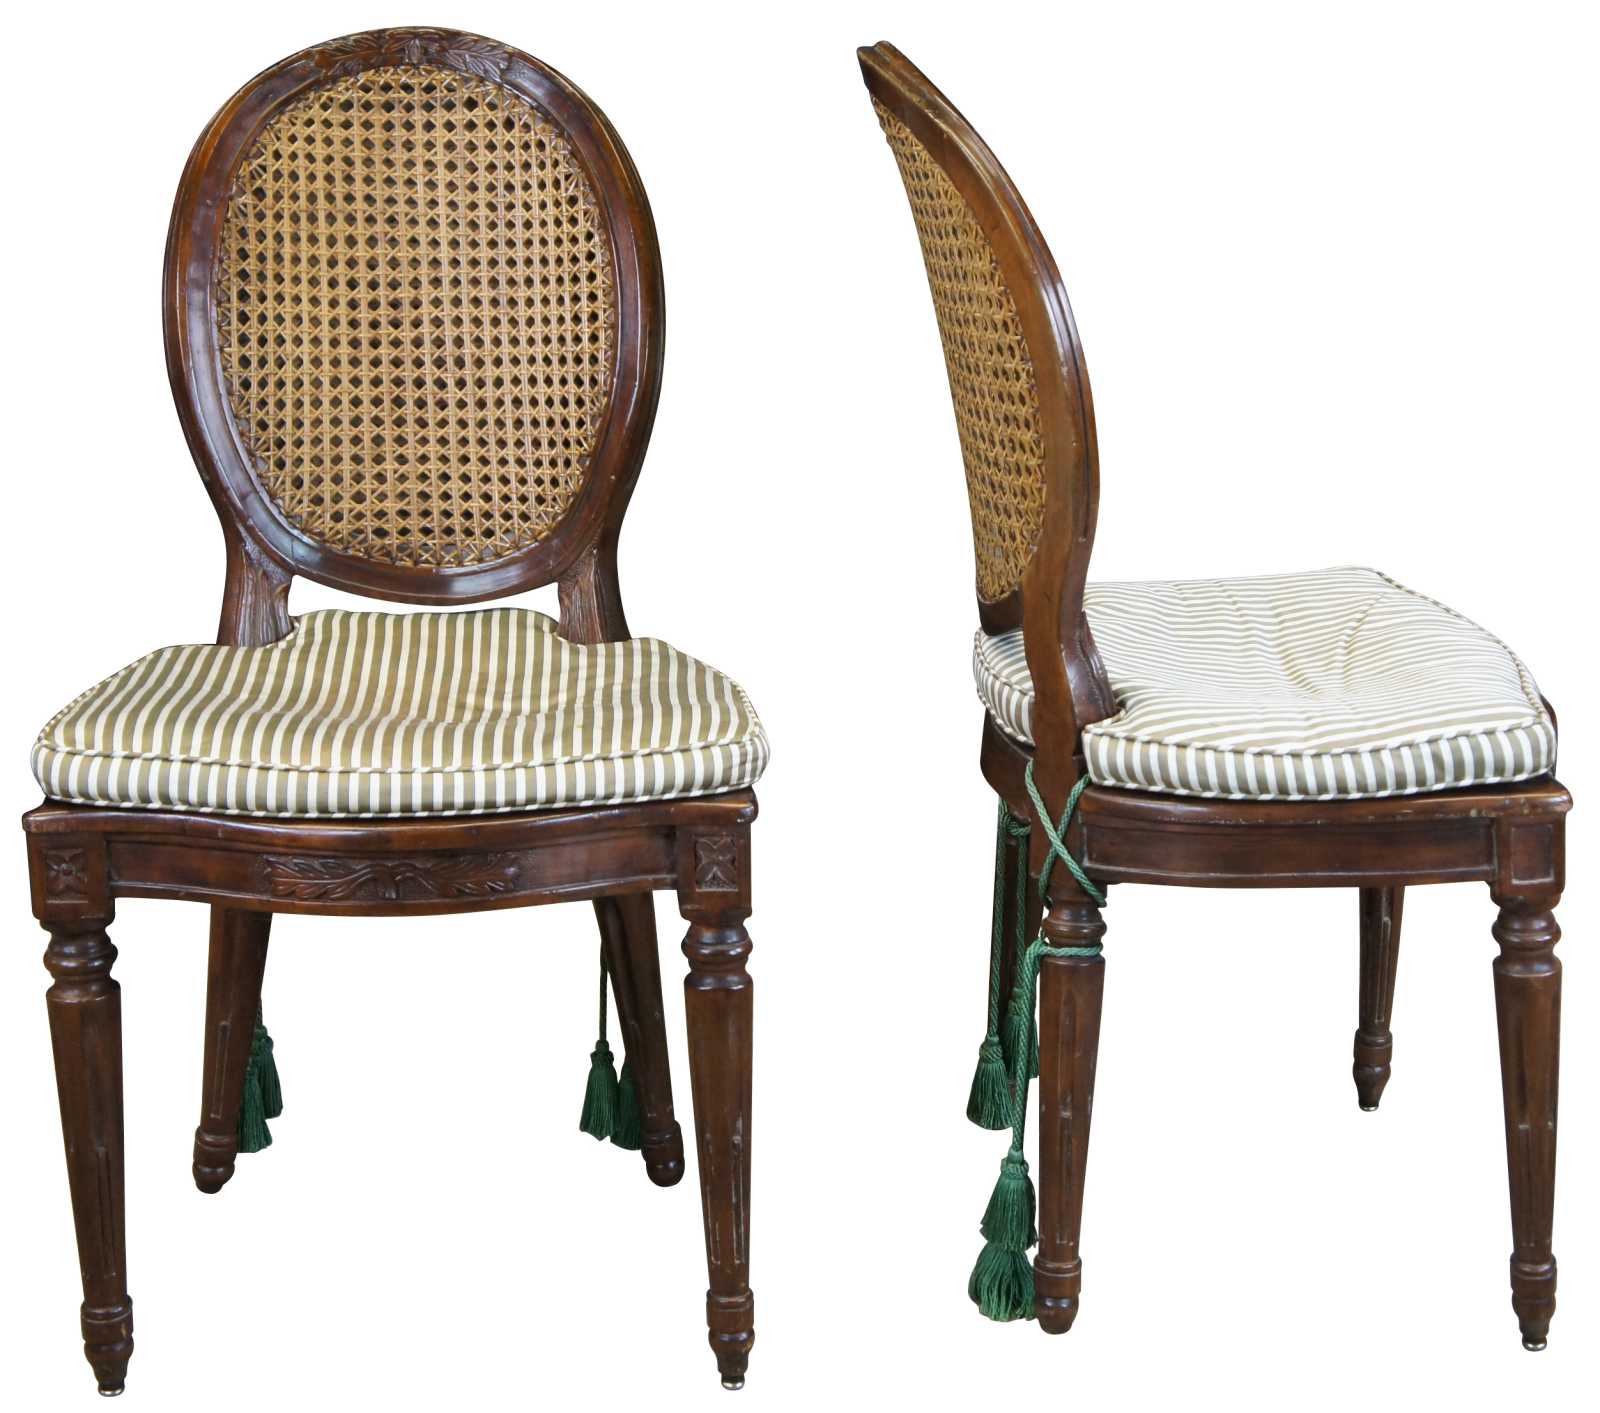 Louis XVI French dining chair oval back with black leather